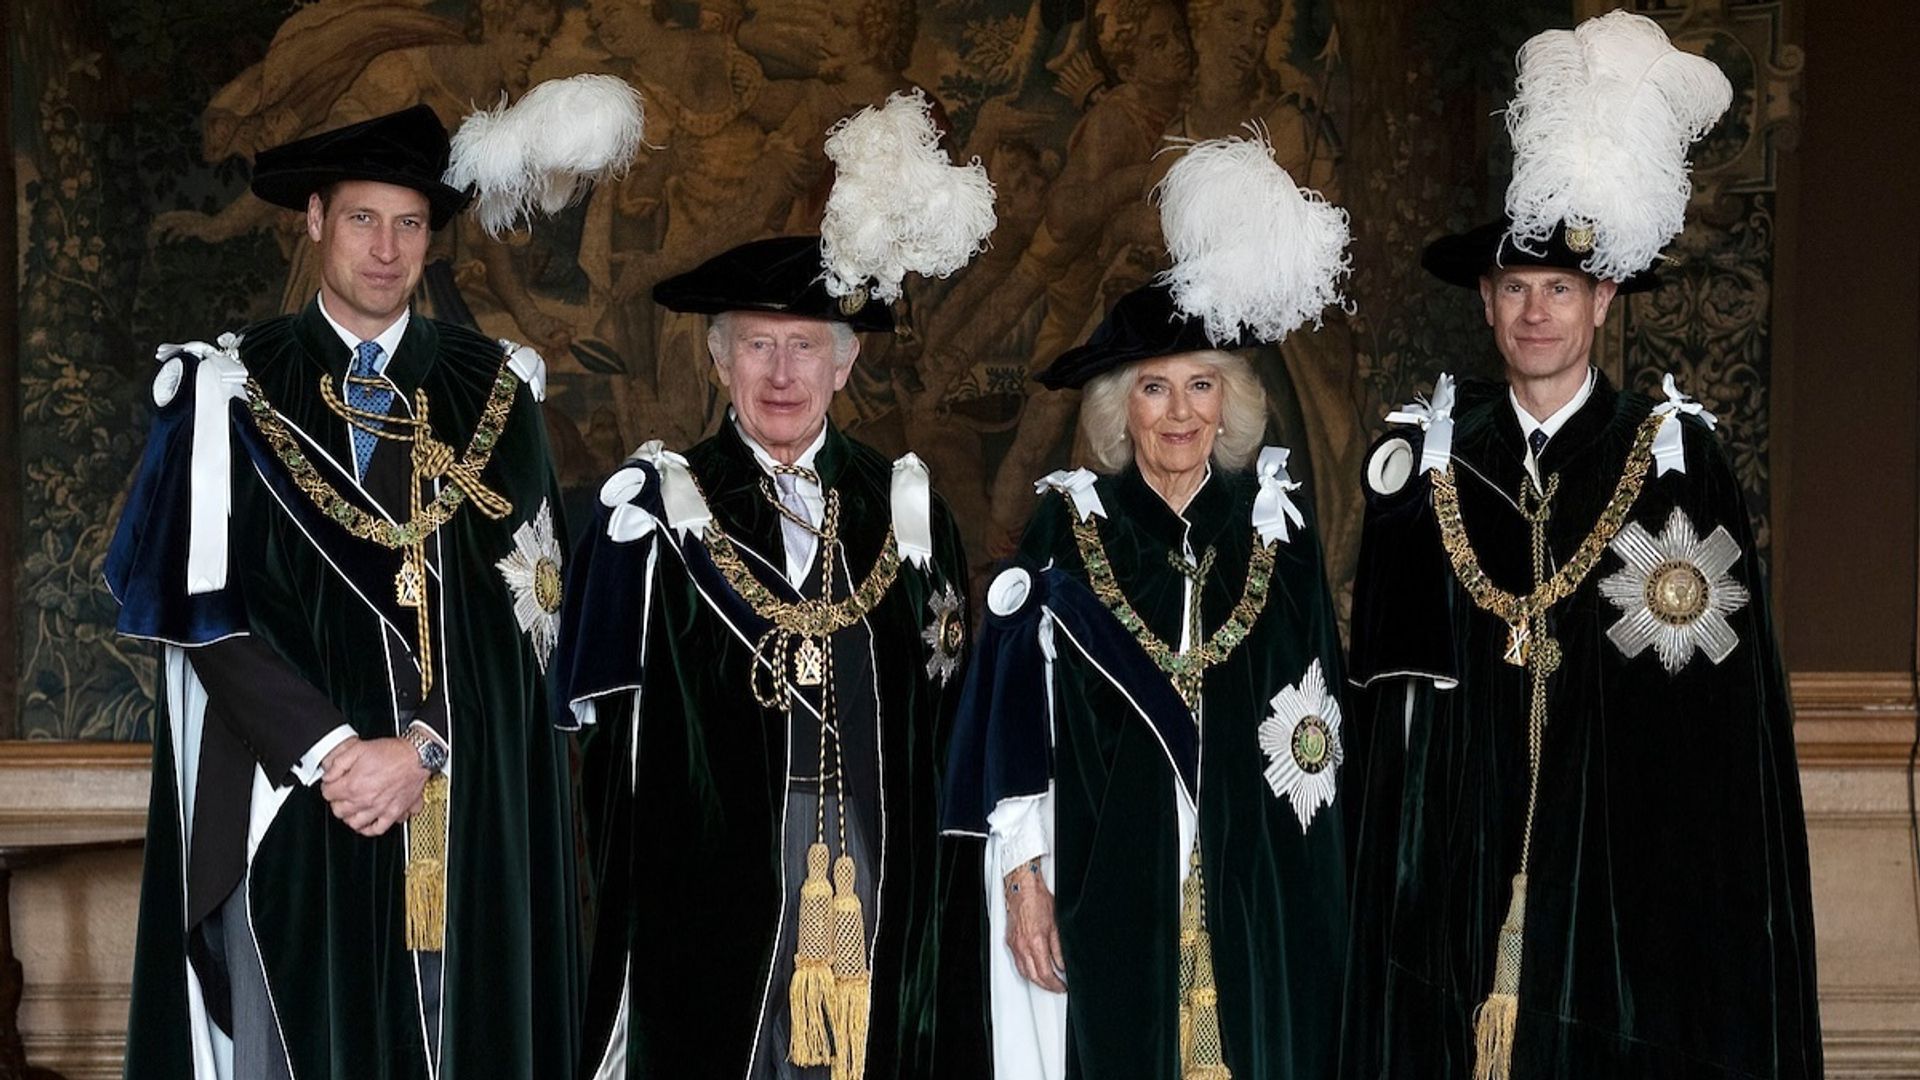 King Charles and Queen Camilla's portrait with Prince William and Prince Edward sparks questions from royal fans